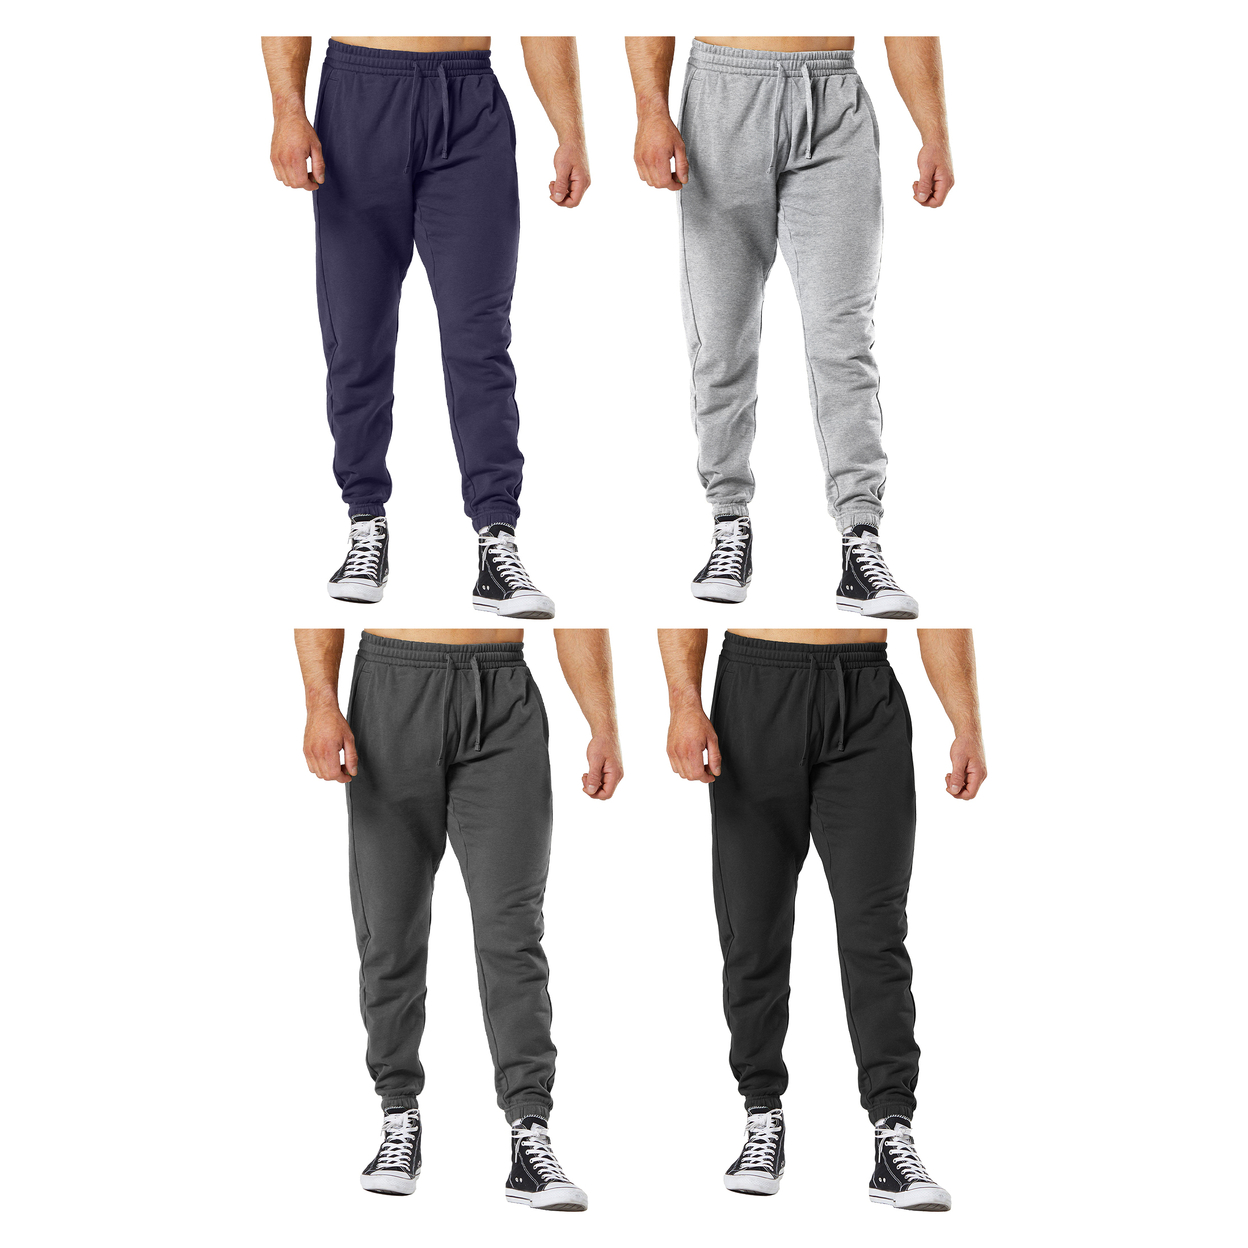 4-Pack: Men's Ultra-Soft Cozy Winter Warm Casual Fleece-Lined Sweatpants Jogger - Small